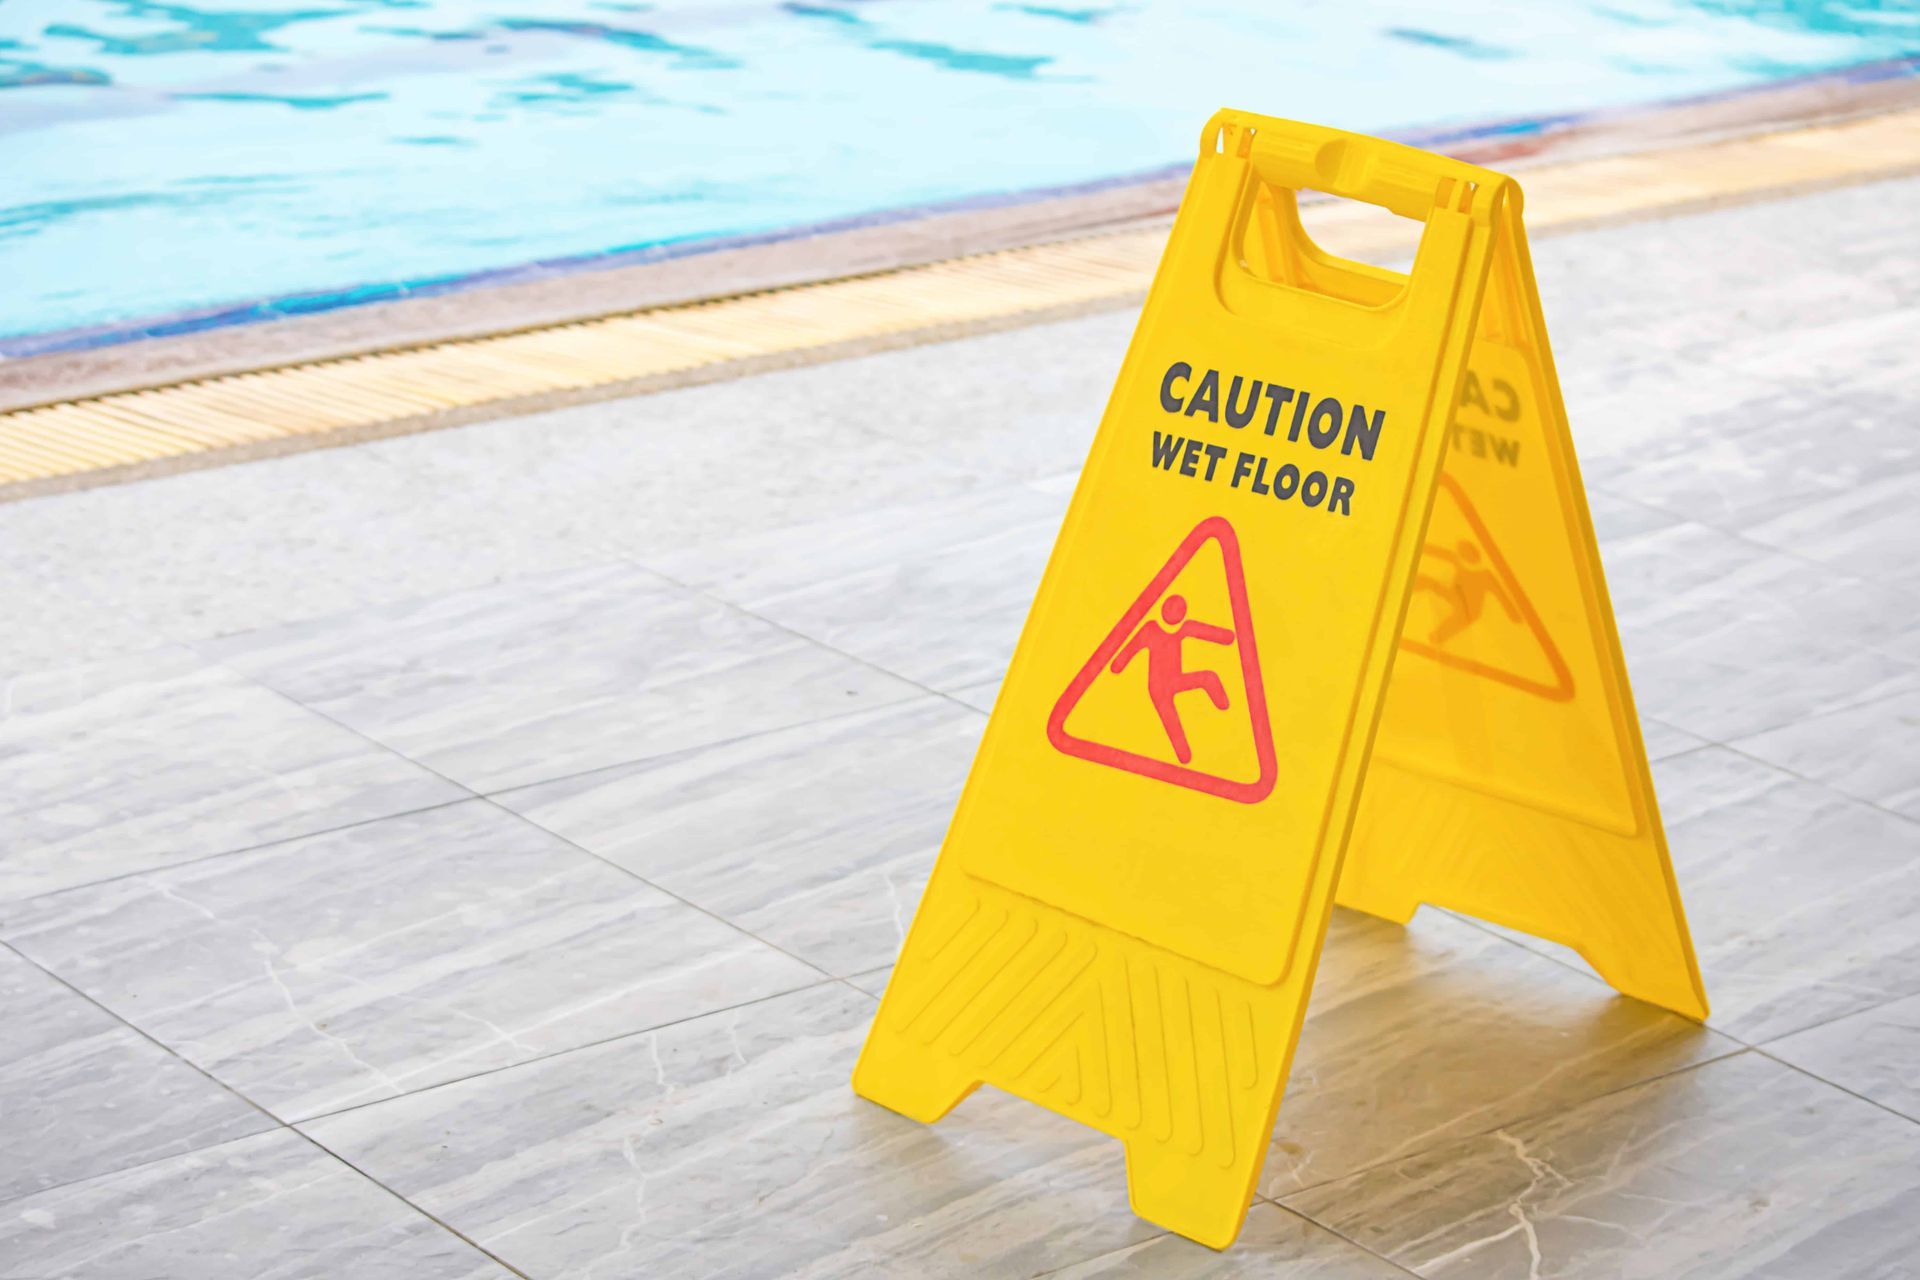 A wet floor sign on a pool deck by a pool